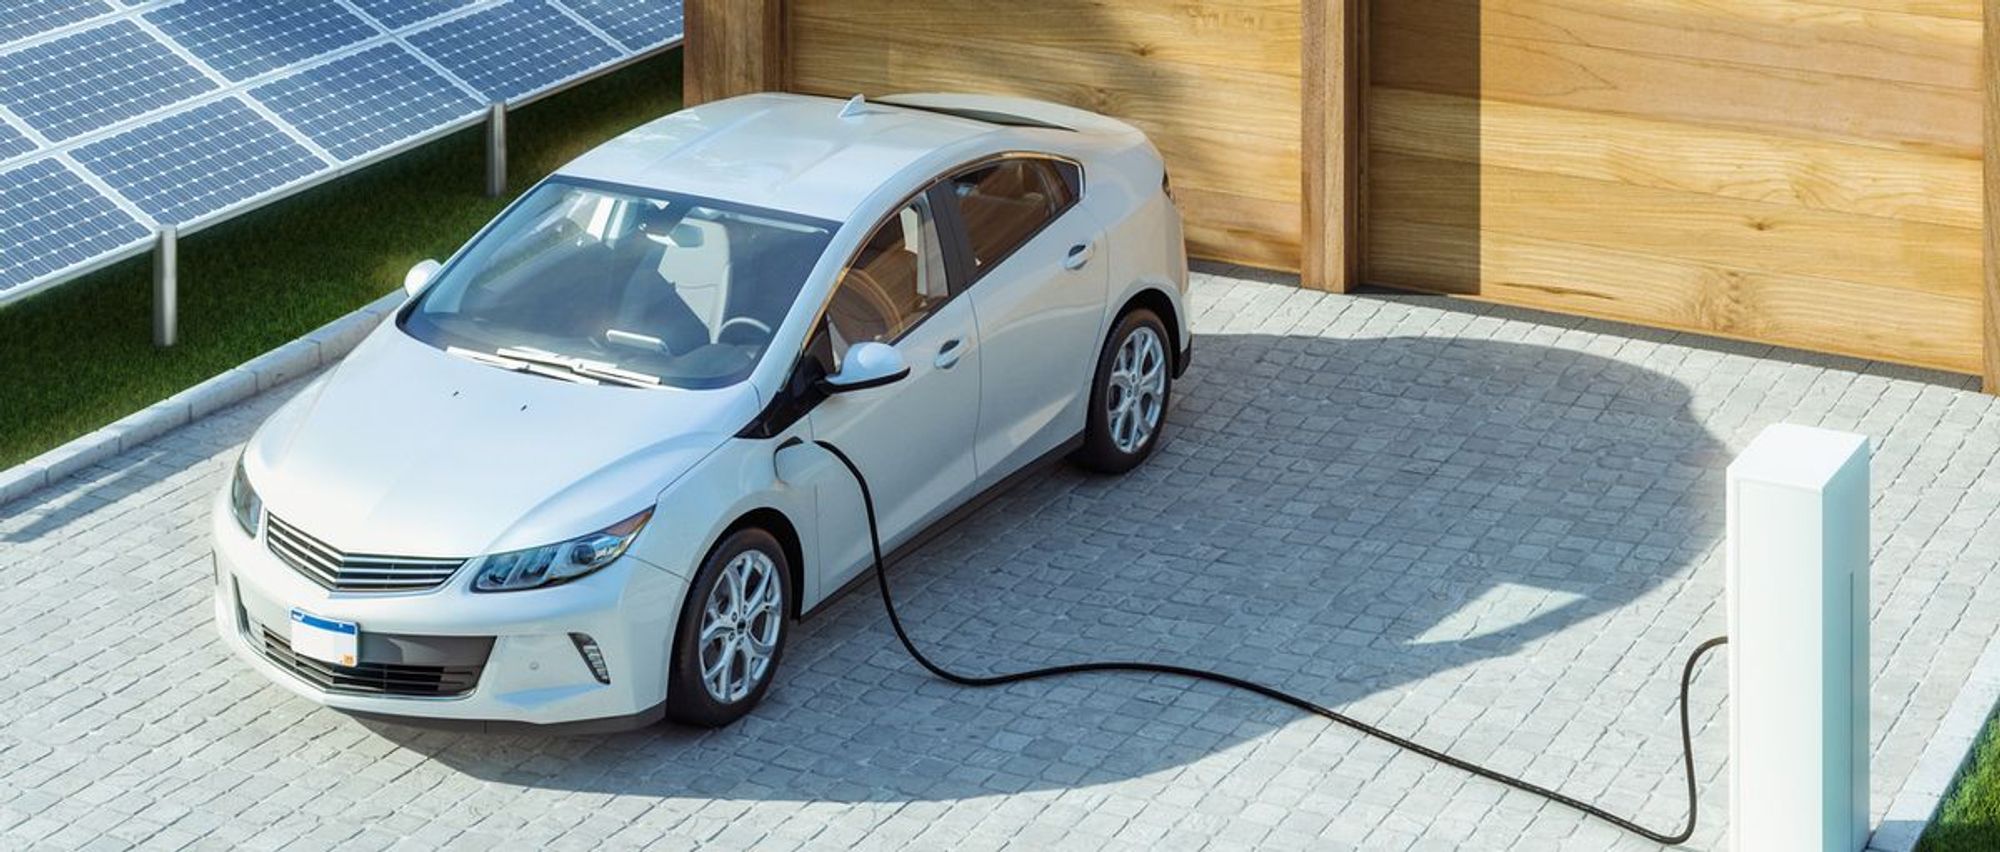 Electric car home charging guide All you need to know in 2019 Gearbrain